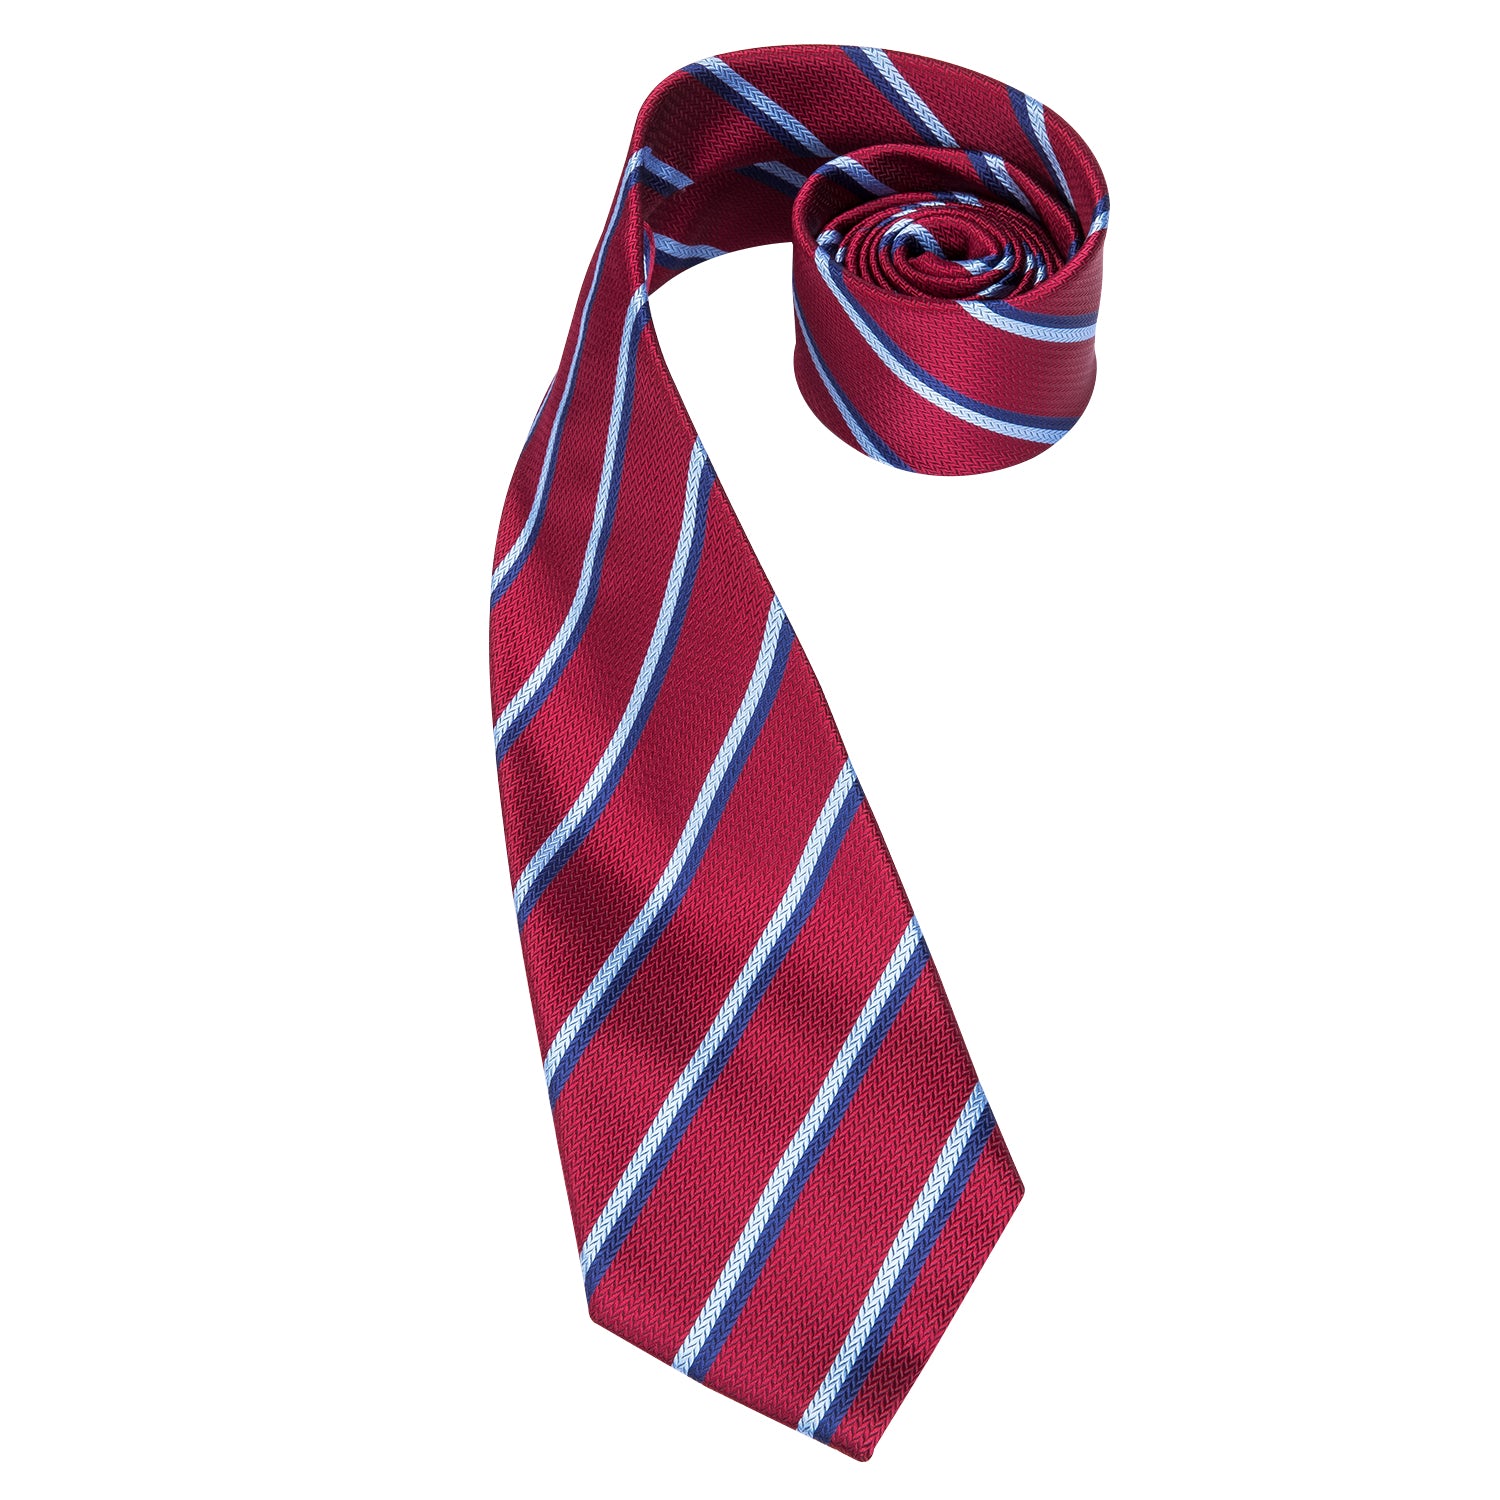 burgundy and blue tie